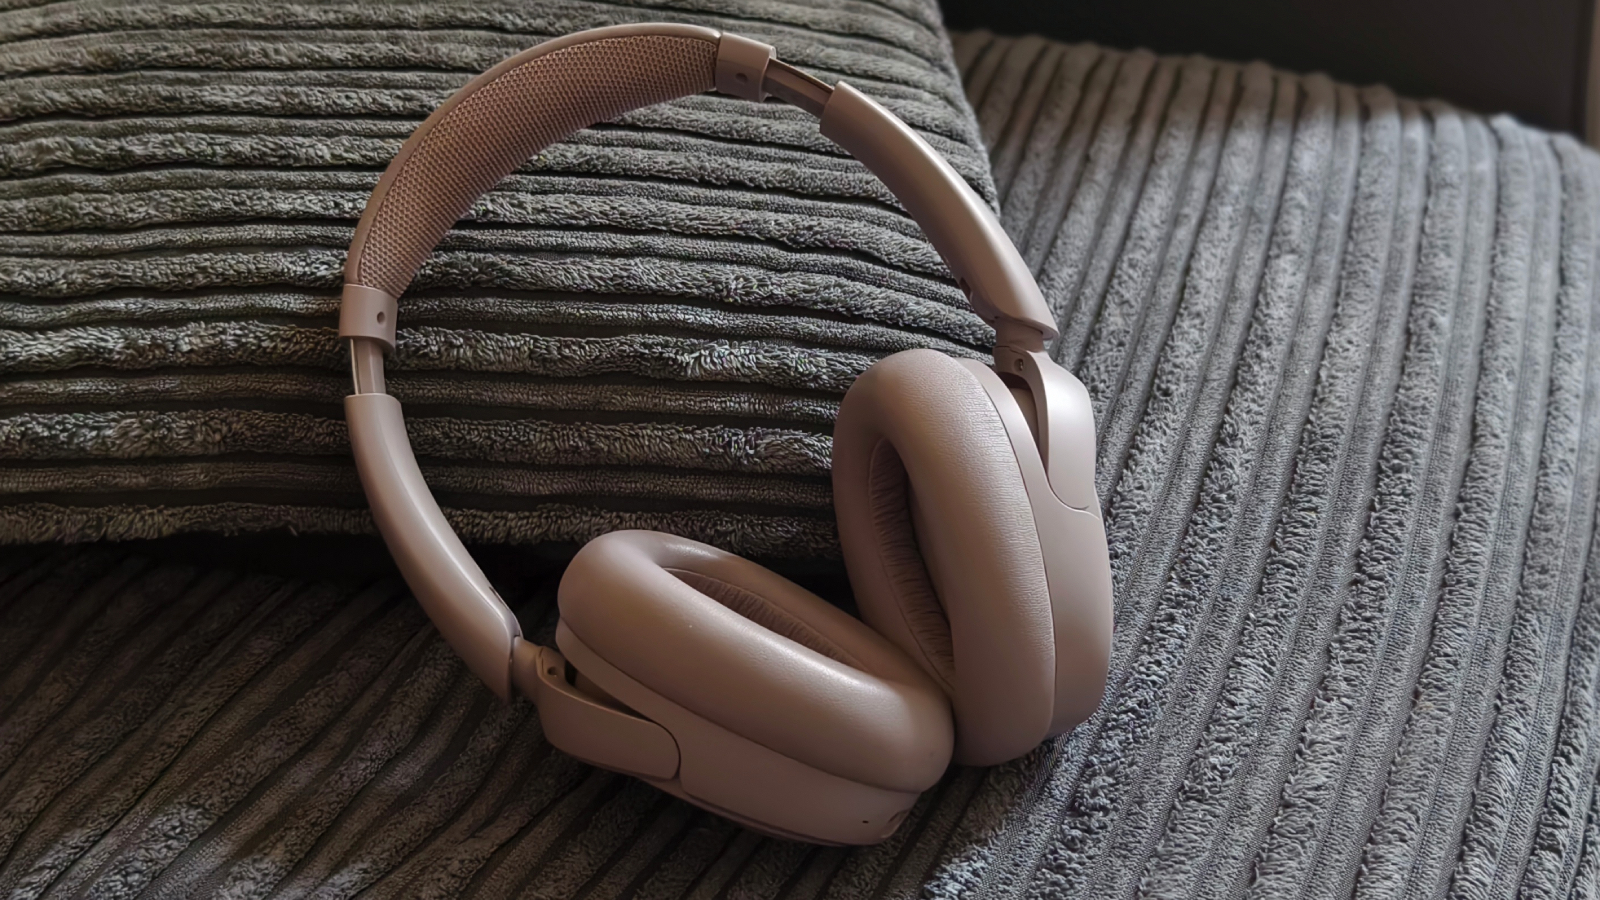 JLab JBuds Lux ANC review: budget headphones that are all about that bass